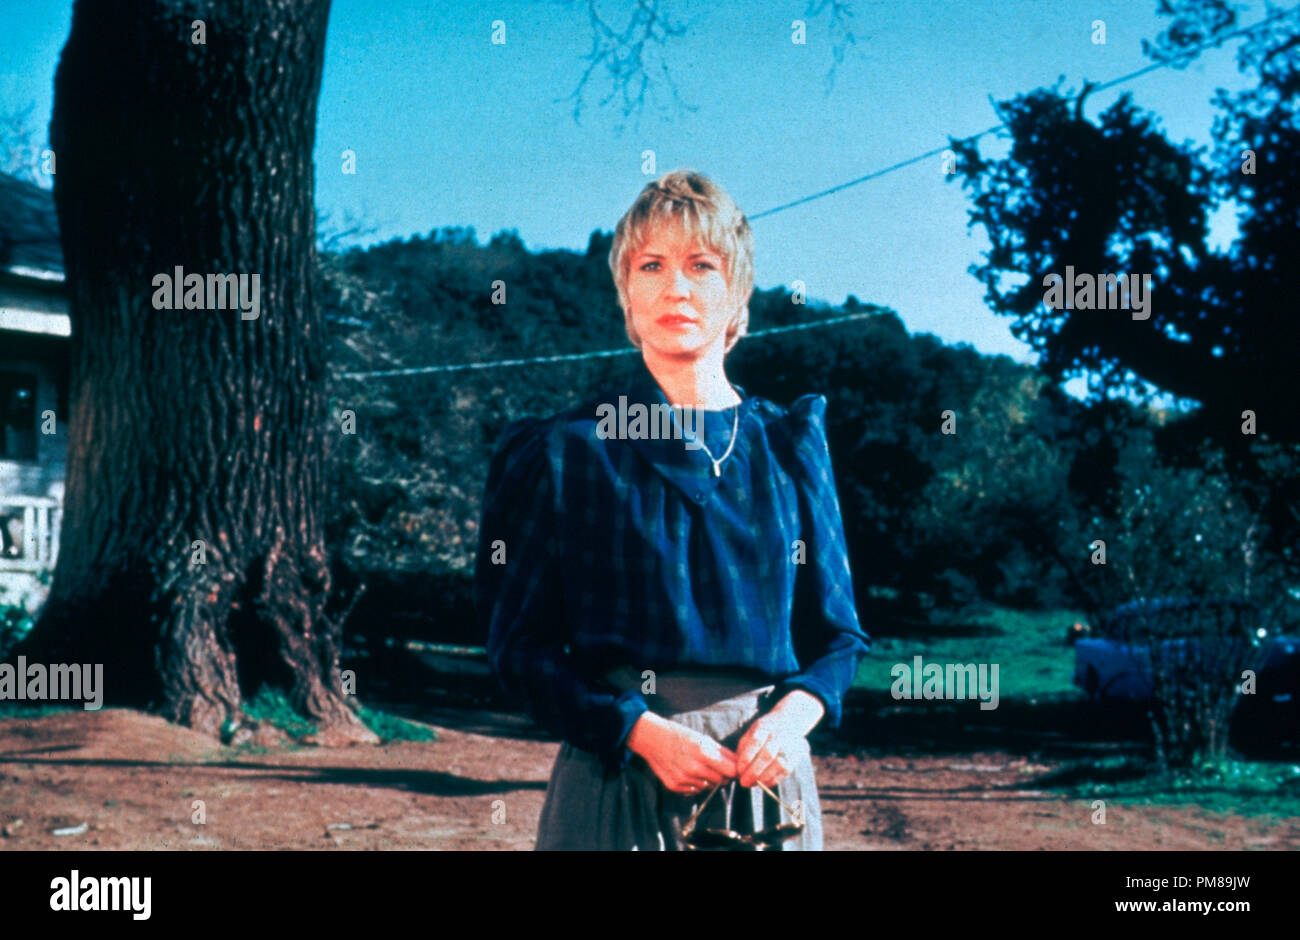 Studio Publicity Still from 'Cujo' Dee Wallace-Stone © 1983 Warner  All Rights Reserved   File Reference # 31708247THA  For Editorial Use Only Stock Photo